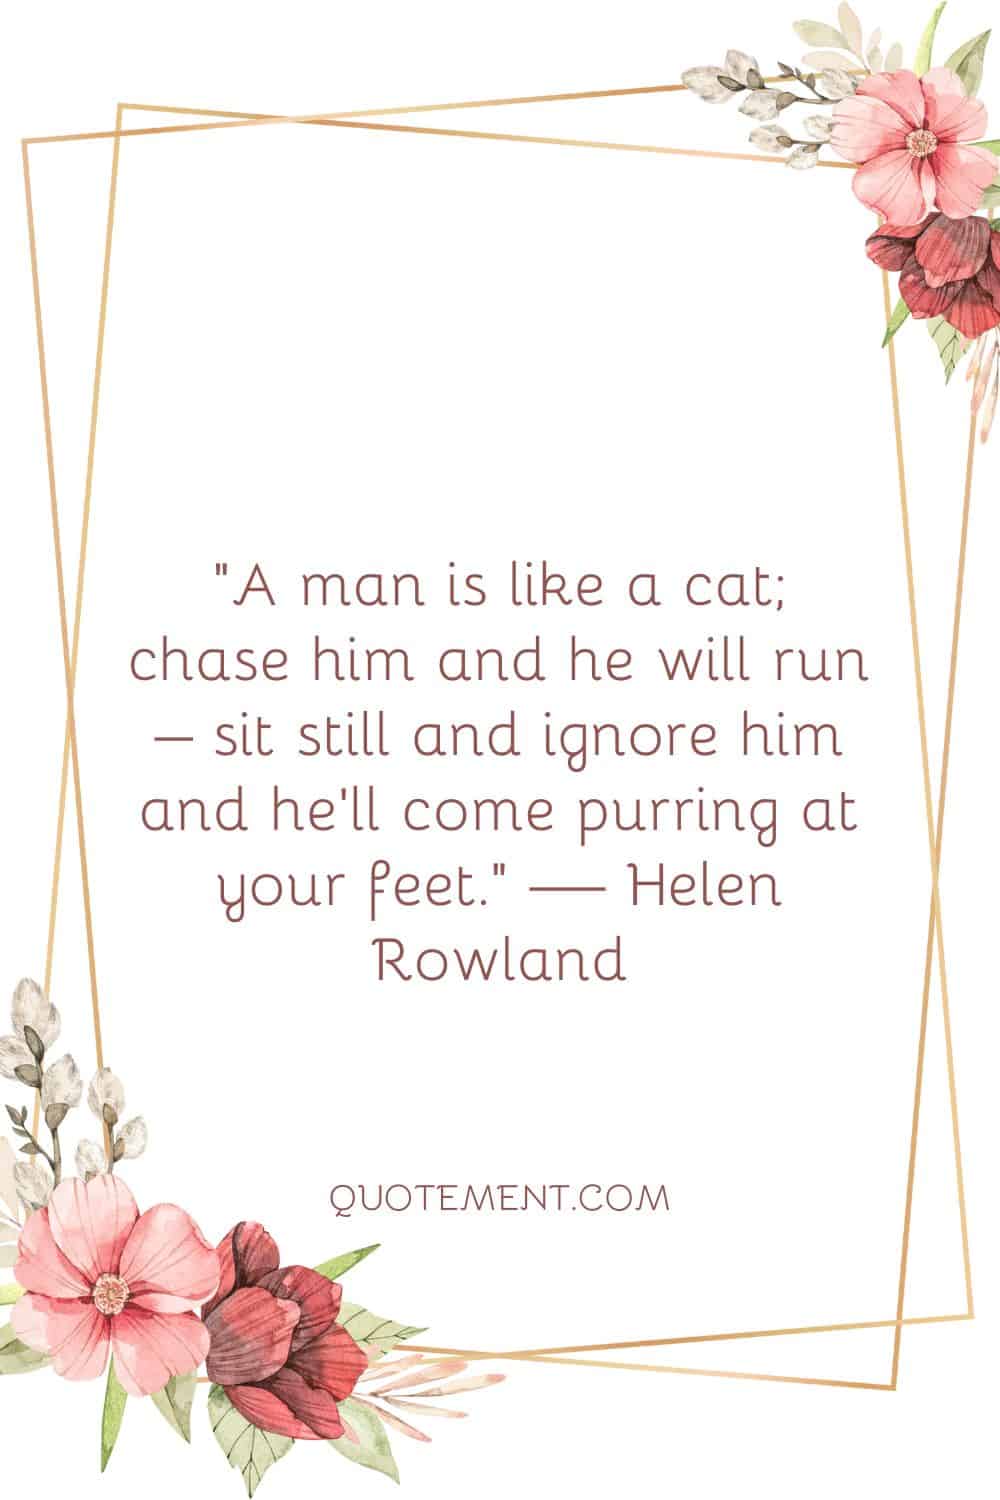 A man is like a cat; chase him and he will run – sit still and ignore him and he’ll come purring at your feet.